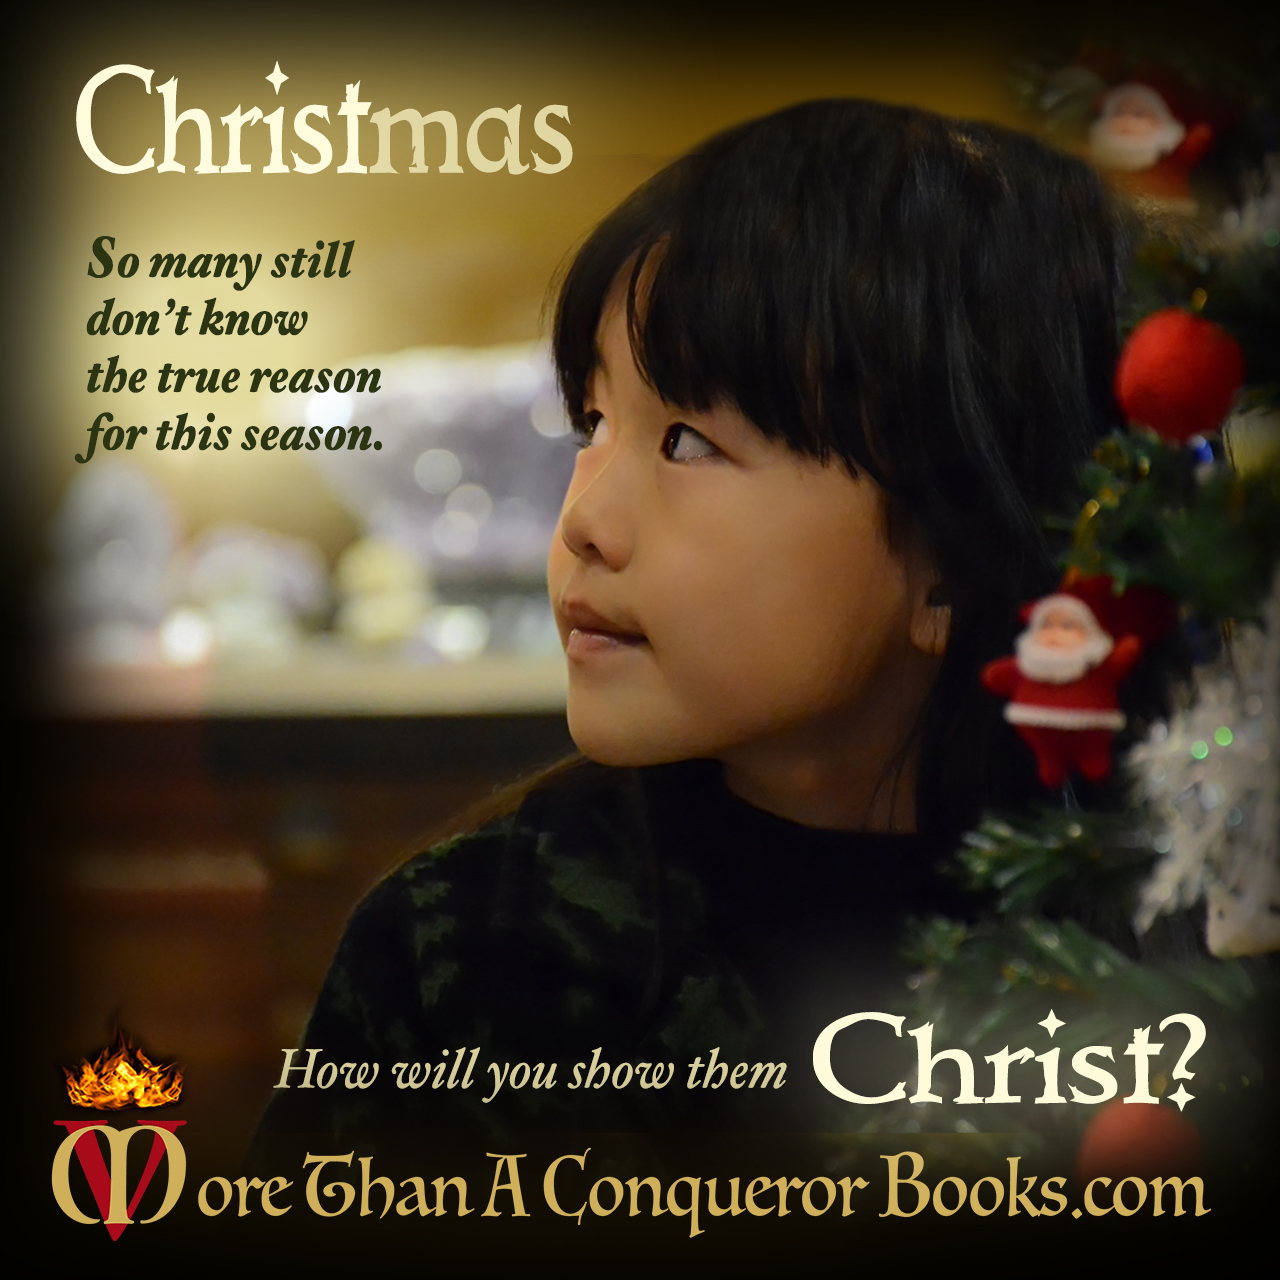 Christmas-So many don't know the true meaning-how will you show them Christ-Mikaela Vincent-MoreThanAConquerorBooks.jpg